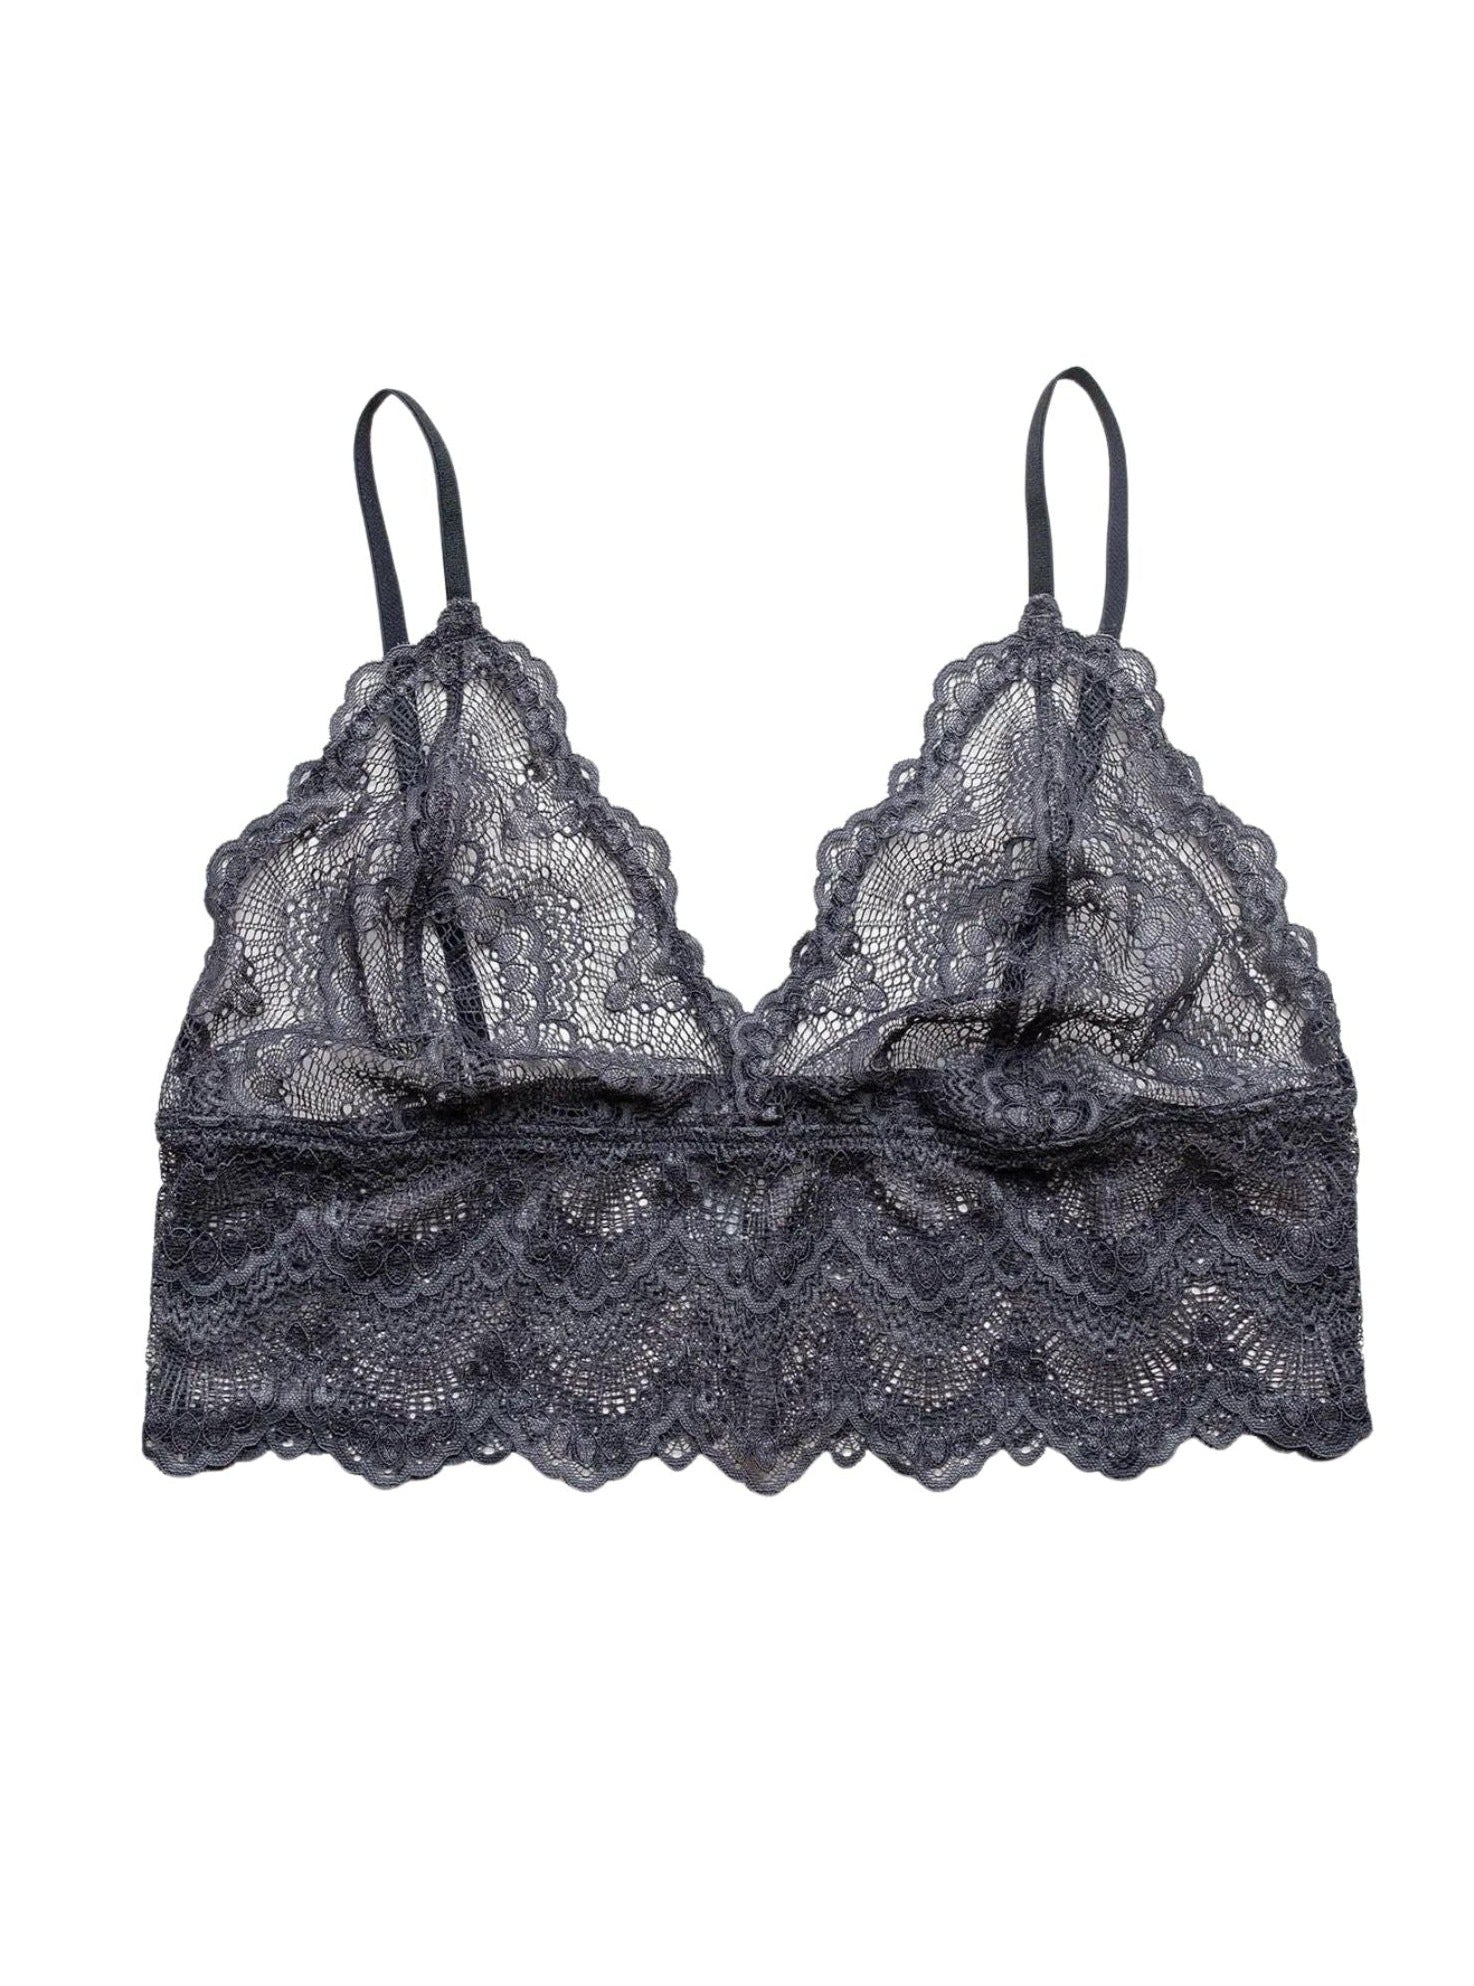 Lace Bralette Top - Mrs. Grey – For Days